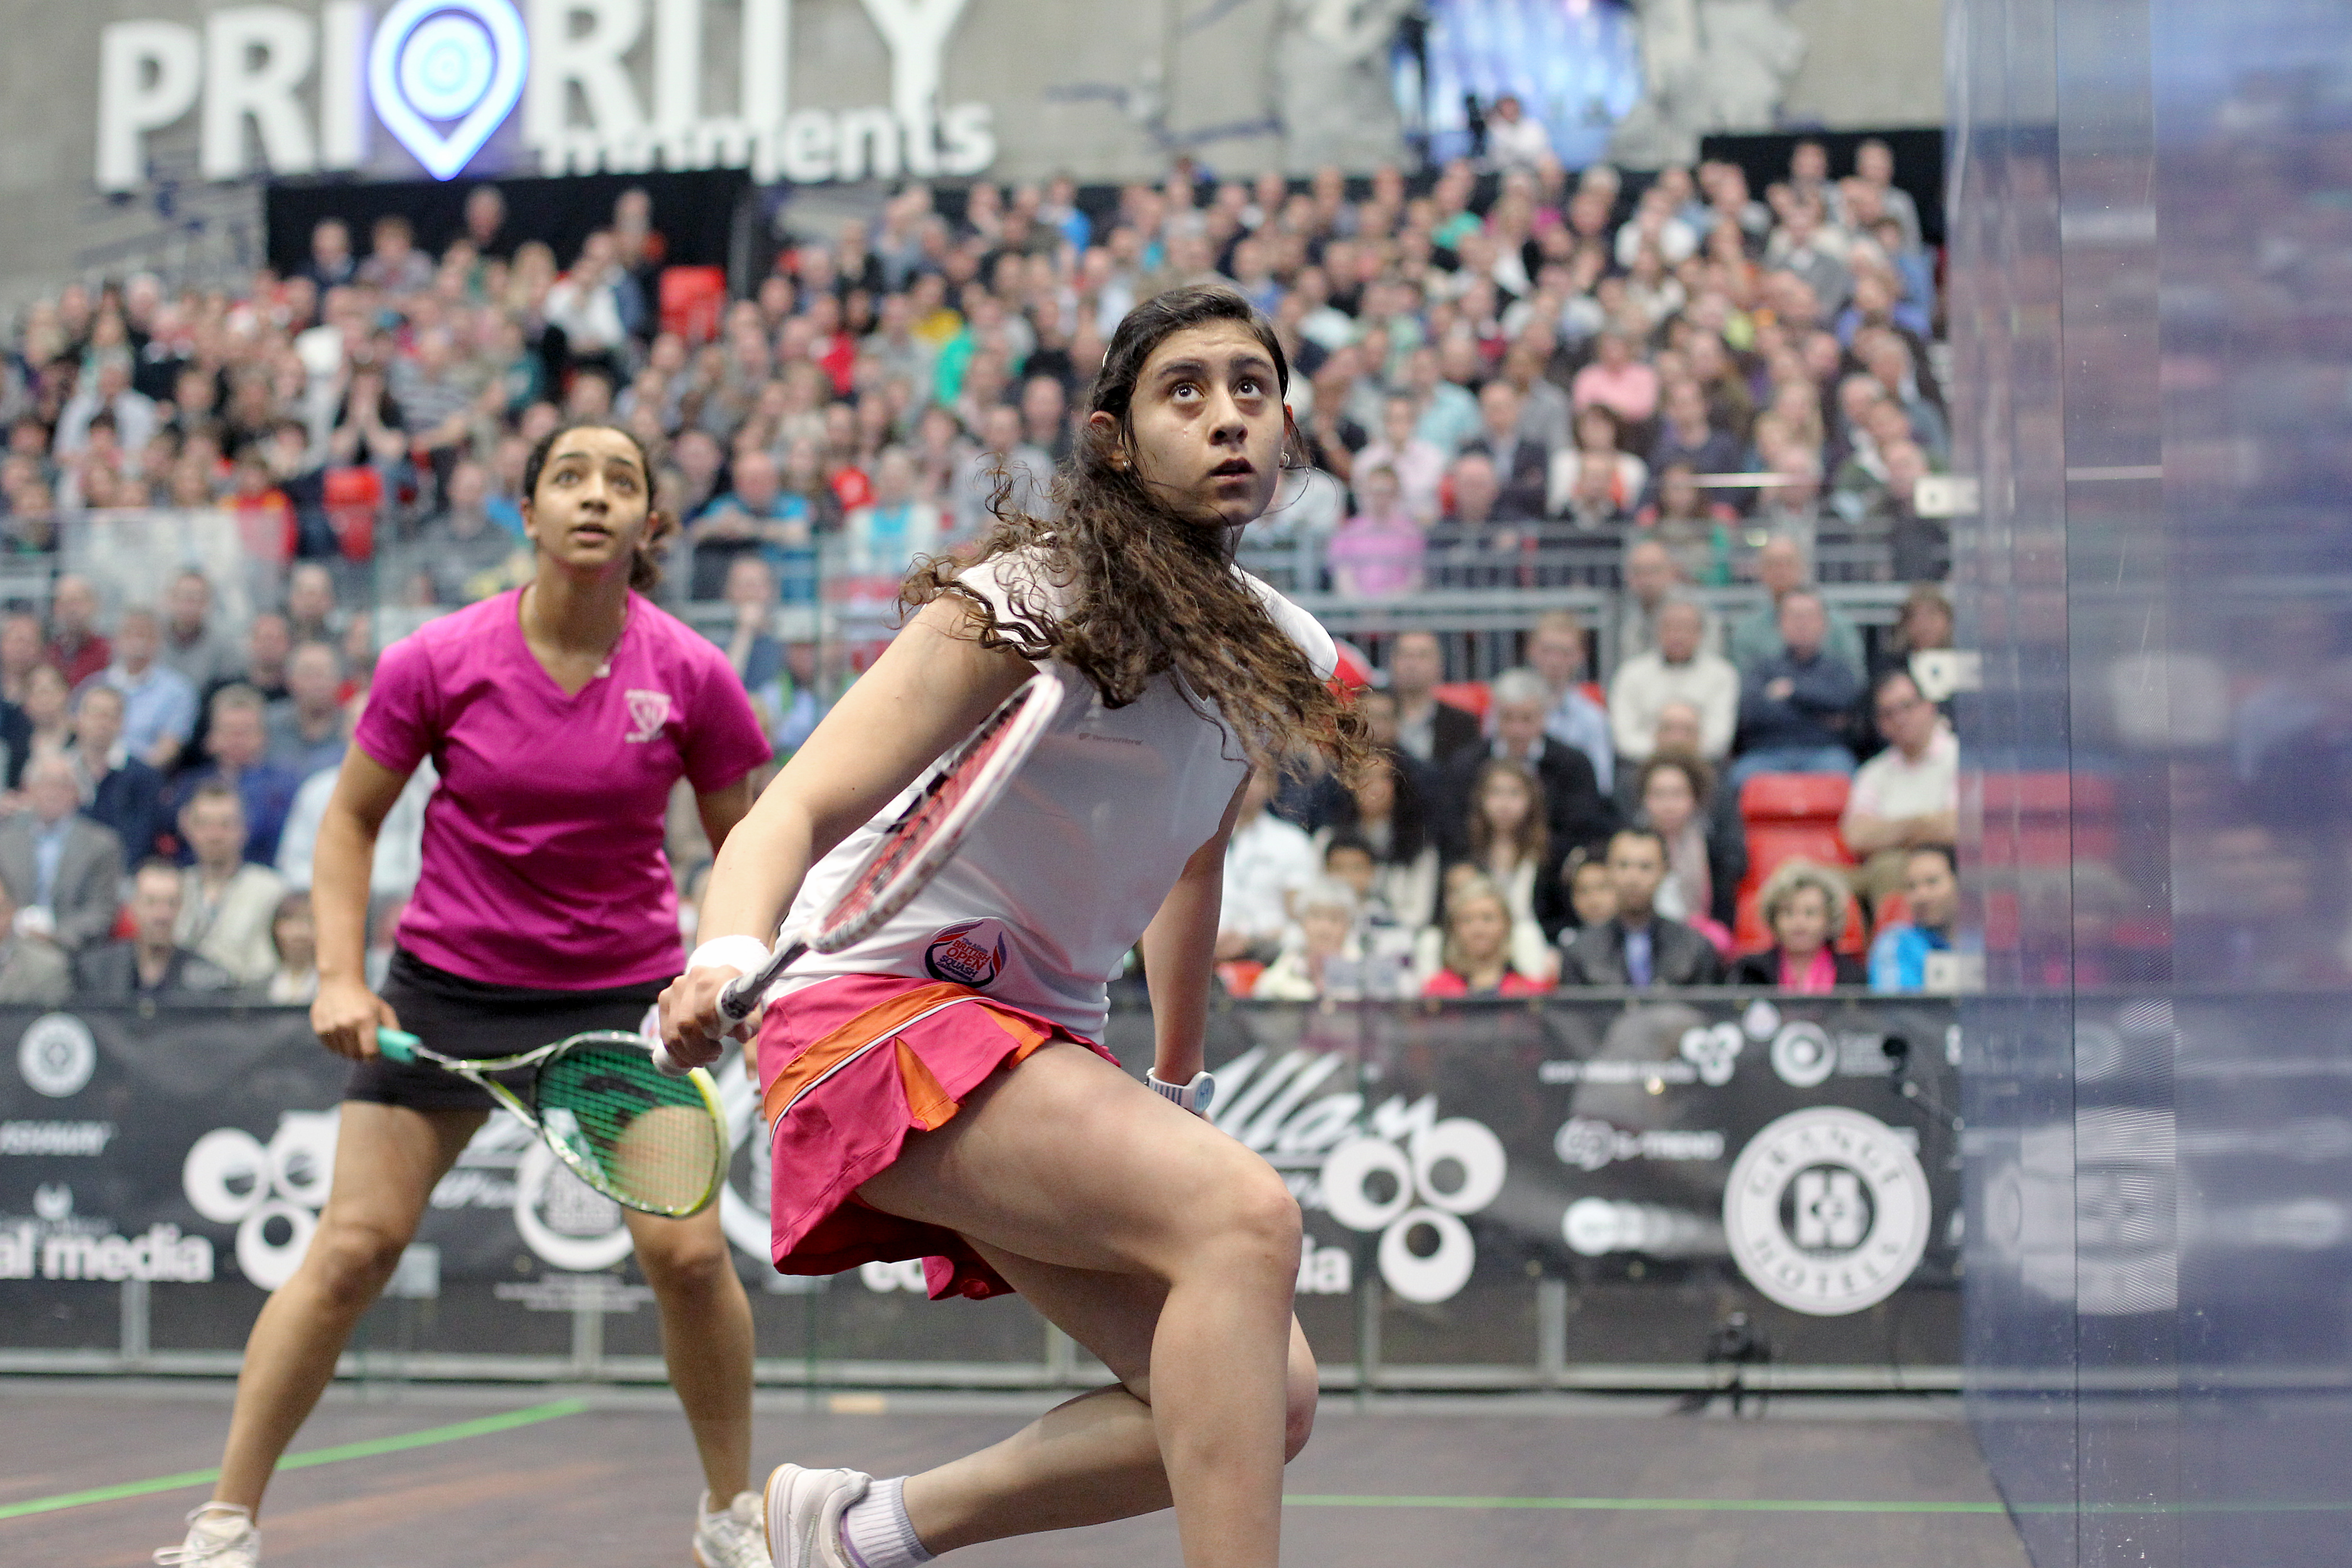 Nour El Sherbini (Above, R), who won the Junior Women’s World Championship three years ago at the age of 13, firmly established herself as a player to be reckoned with on the WSA tour when she reached the finals of the British Open. 